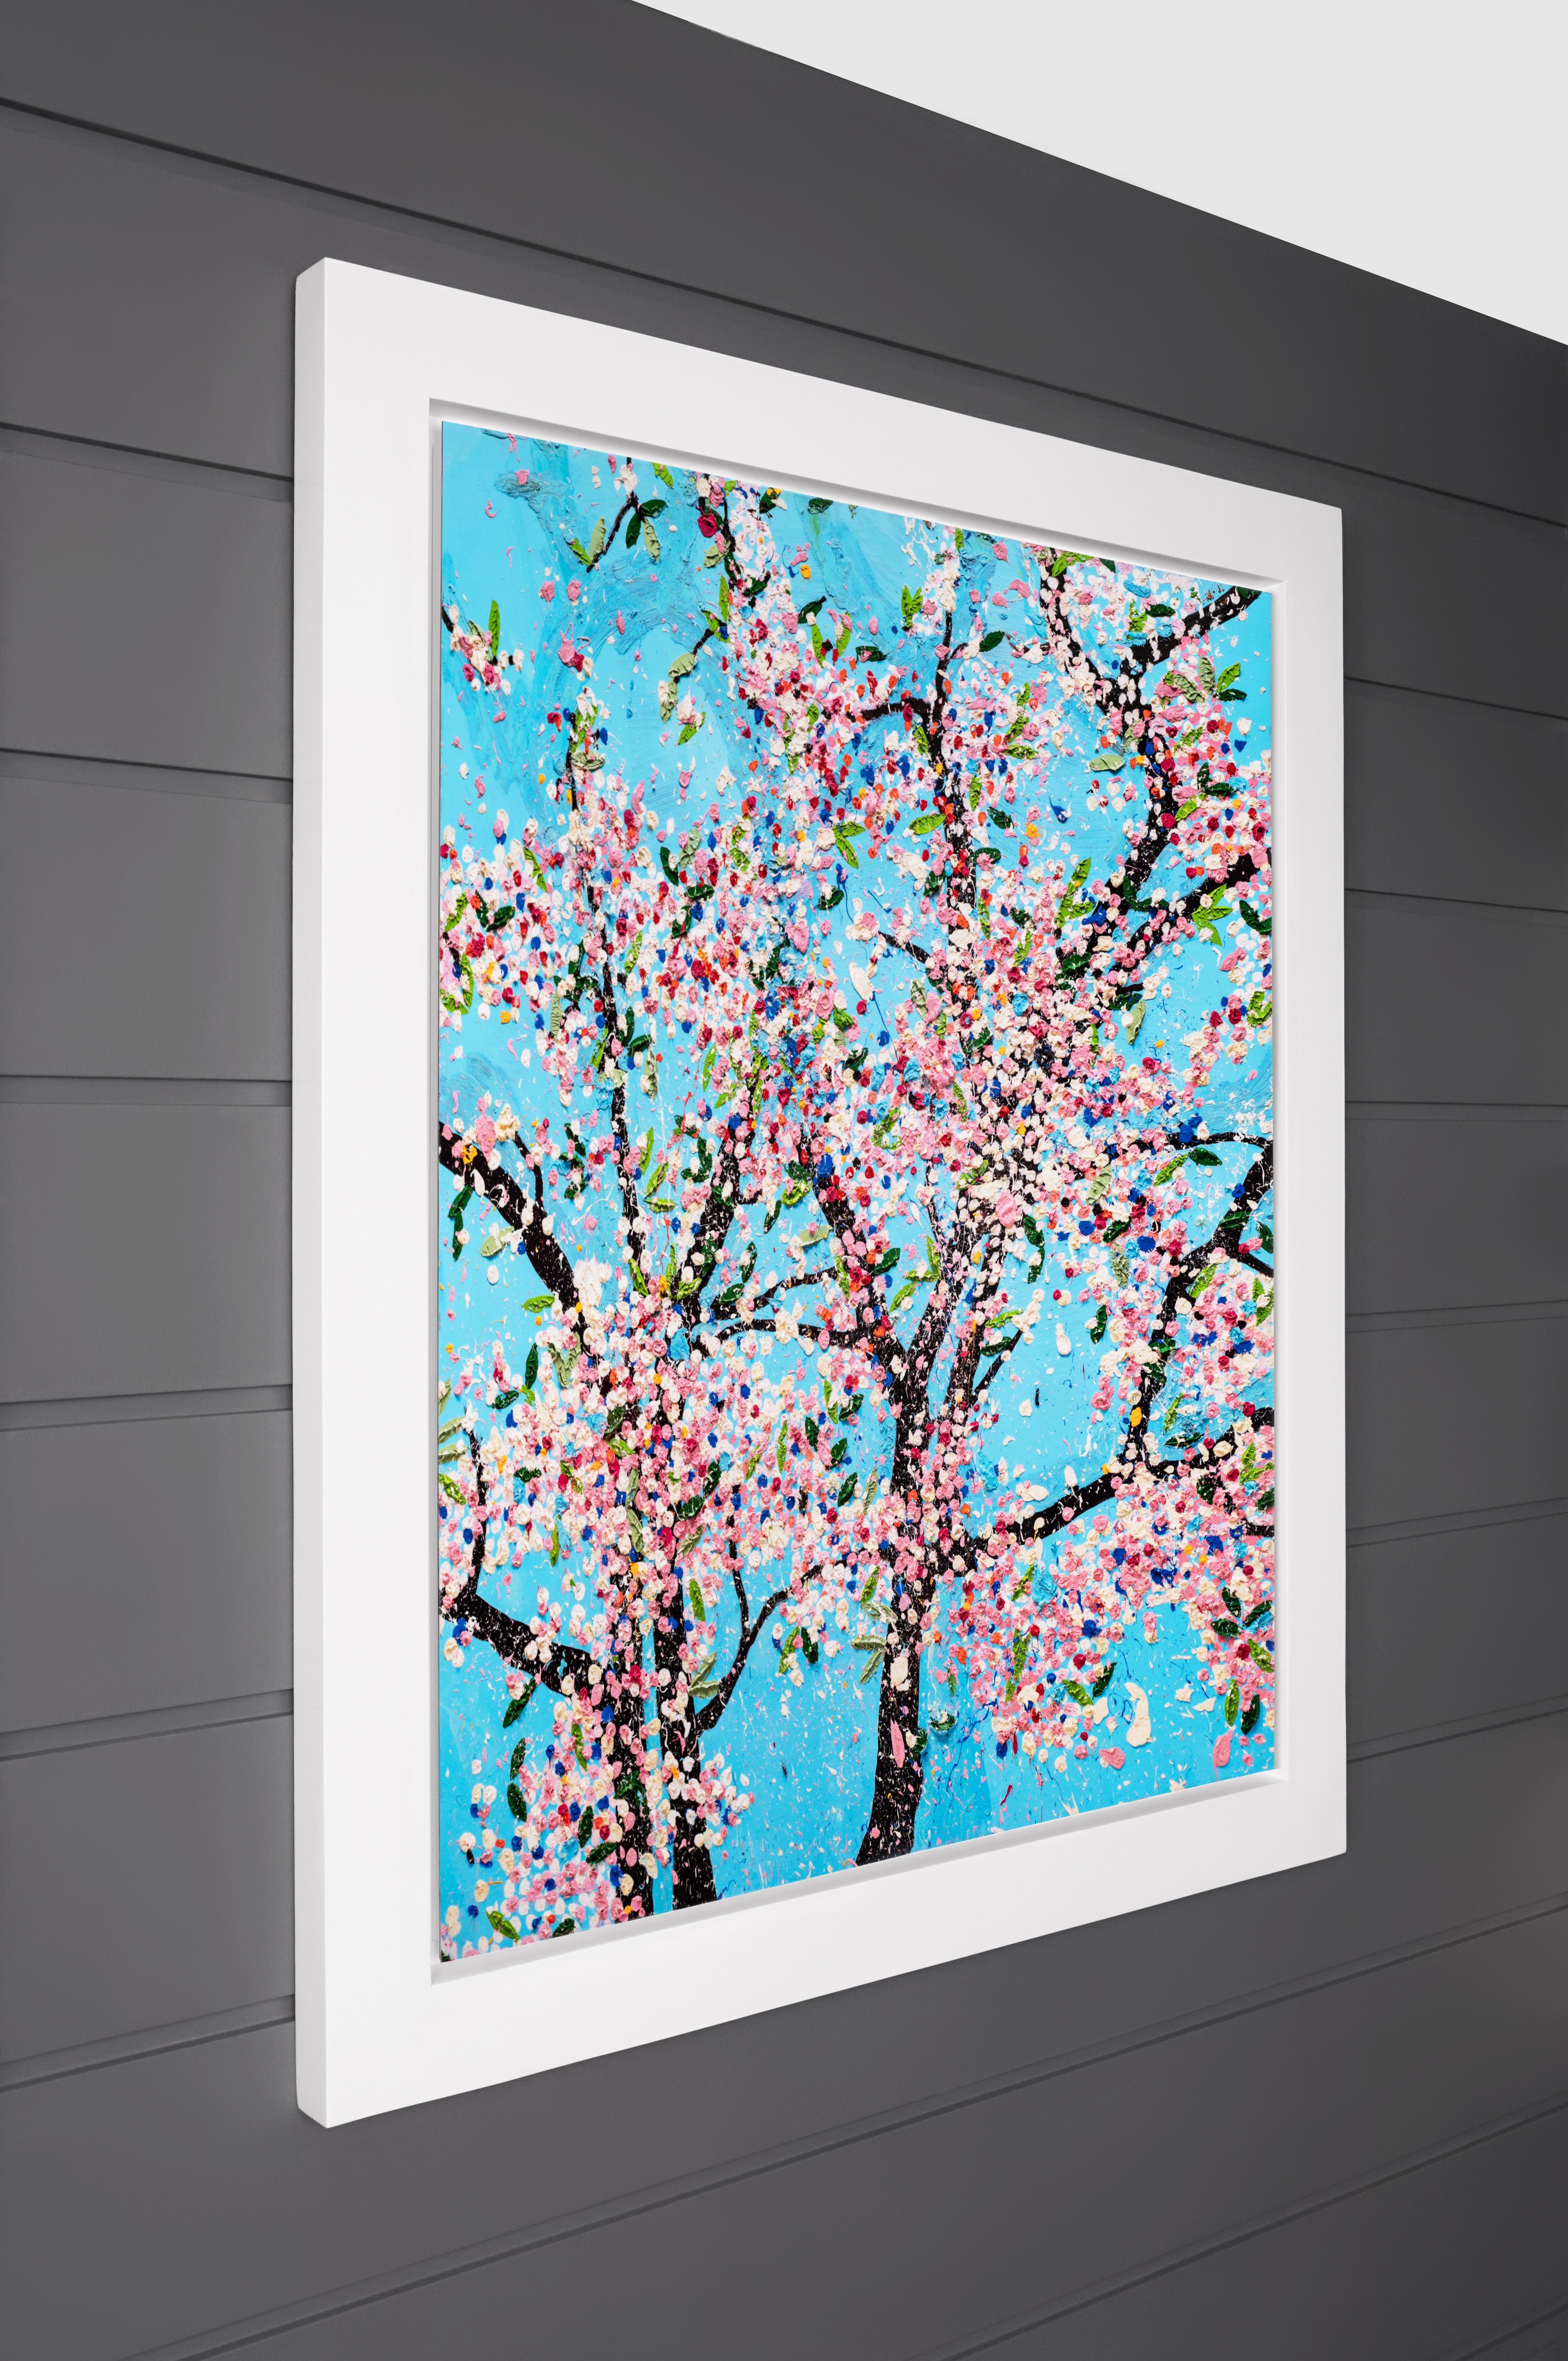 The Virtues 'Politeness', Limited Edition 'Cherry Blossom' Landscape - Print by Damien Hirst